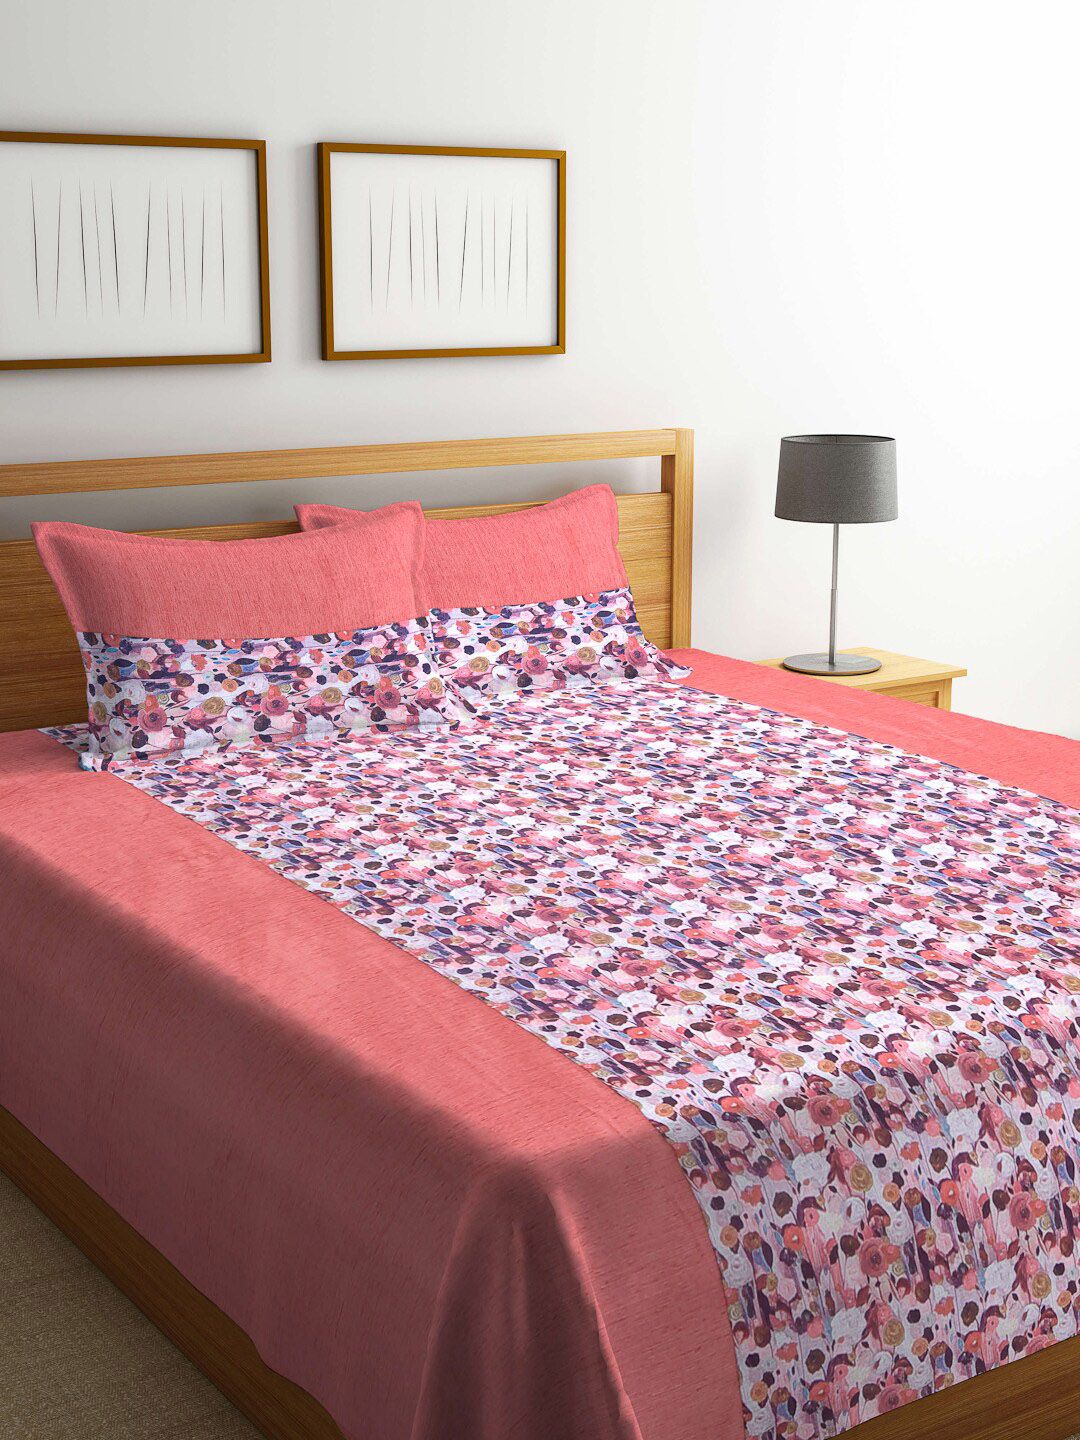 KLOTTHE Peach-Coloured & White Printed Cotton Double Bed Cover with 2 Pillow Covers Price in India